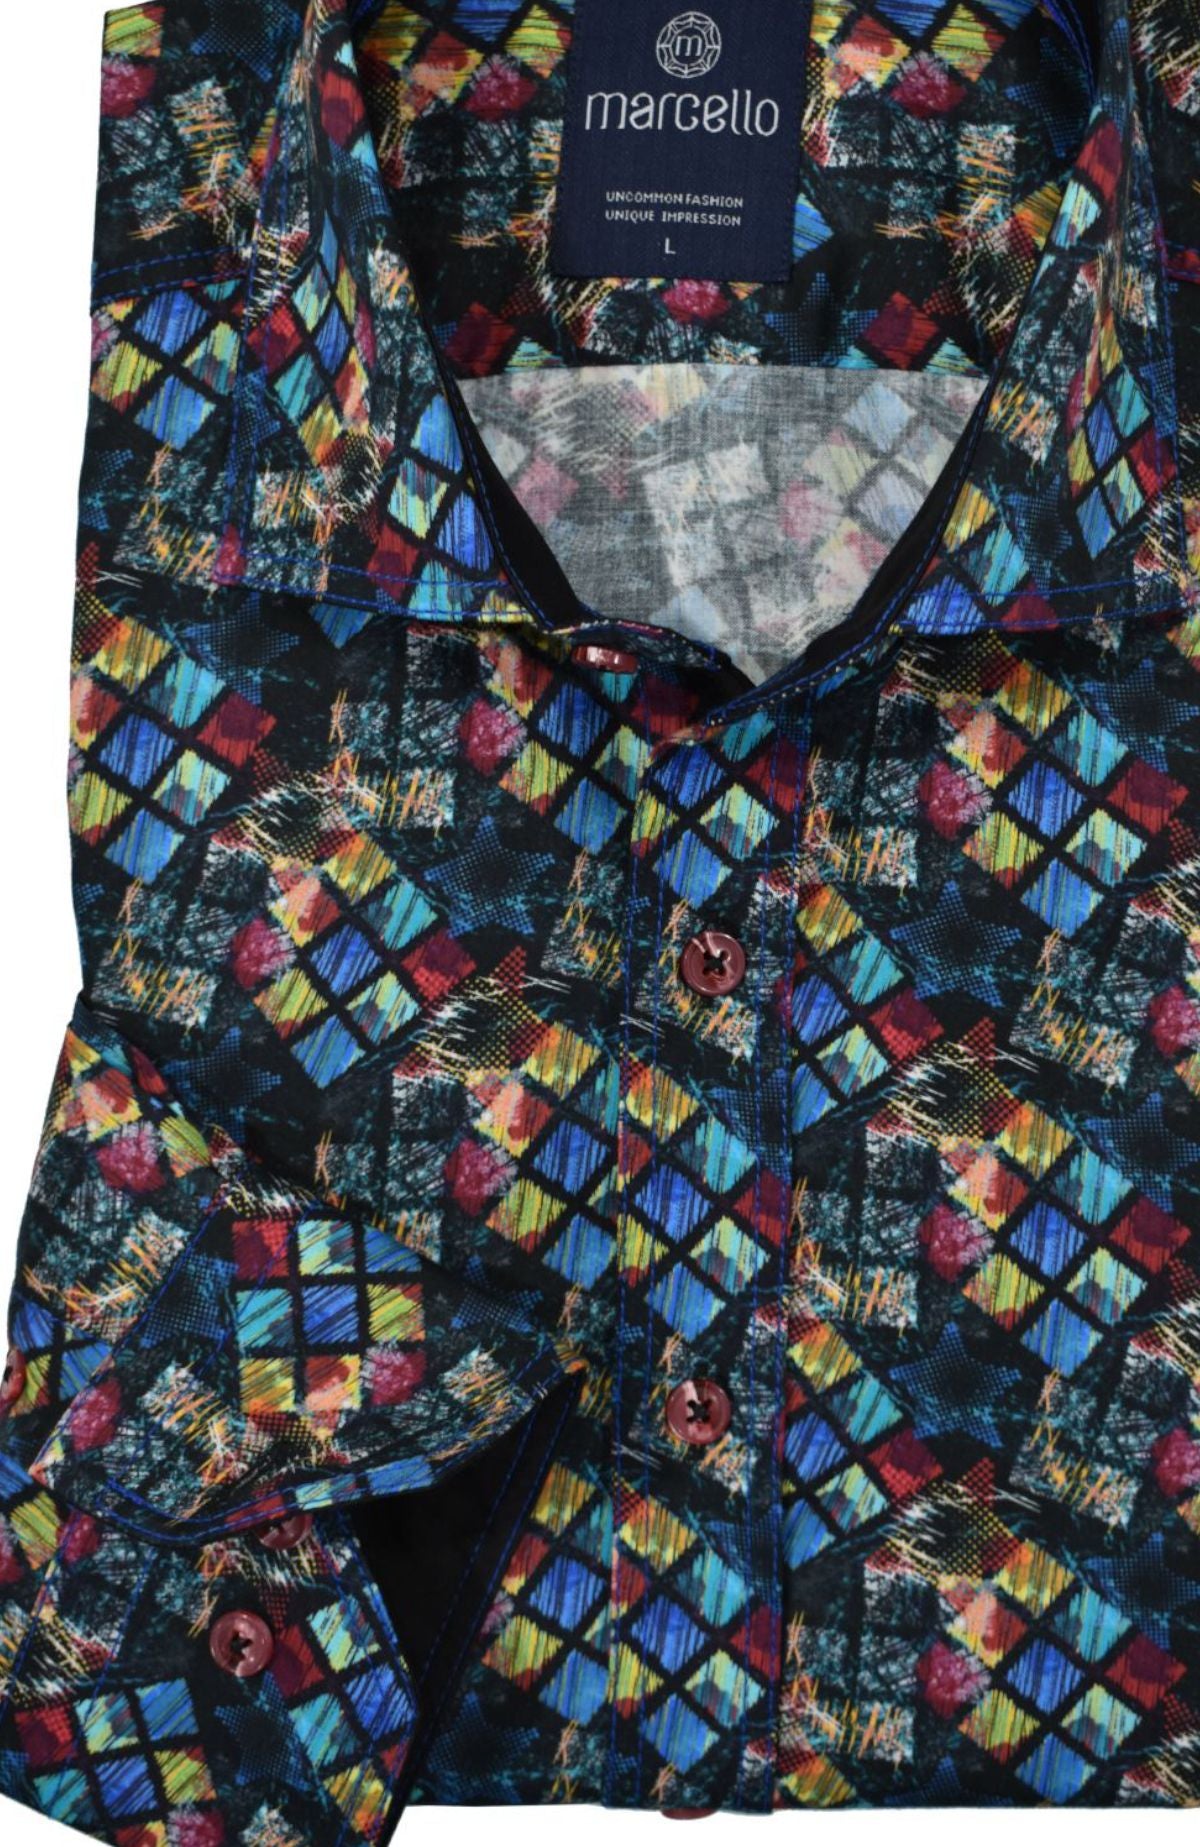 A unique print boasting jewel toned colors on soft cotton sateen fabric. This piece of artistry is designed to remain a unique accessory to any wardrobe. Double tracked stitching, matched buttons and a classic shaped fit complement the fashion look. With its cutting-edge style and traditional silhouette, you'll be ready for any occasion. By Marcello